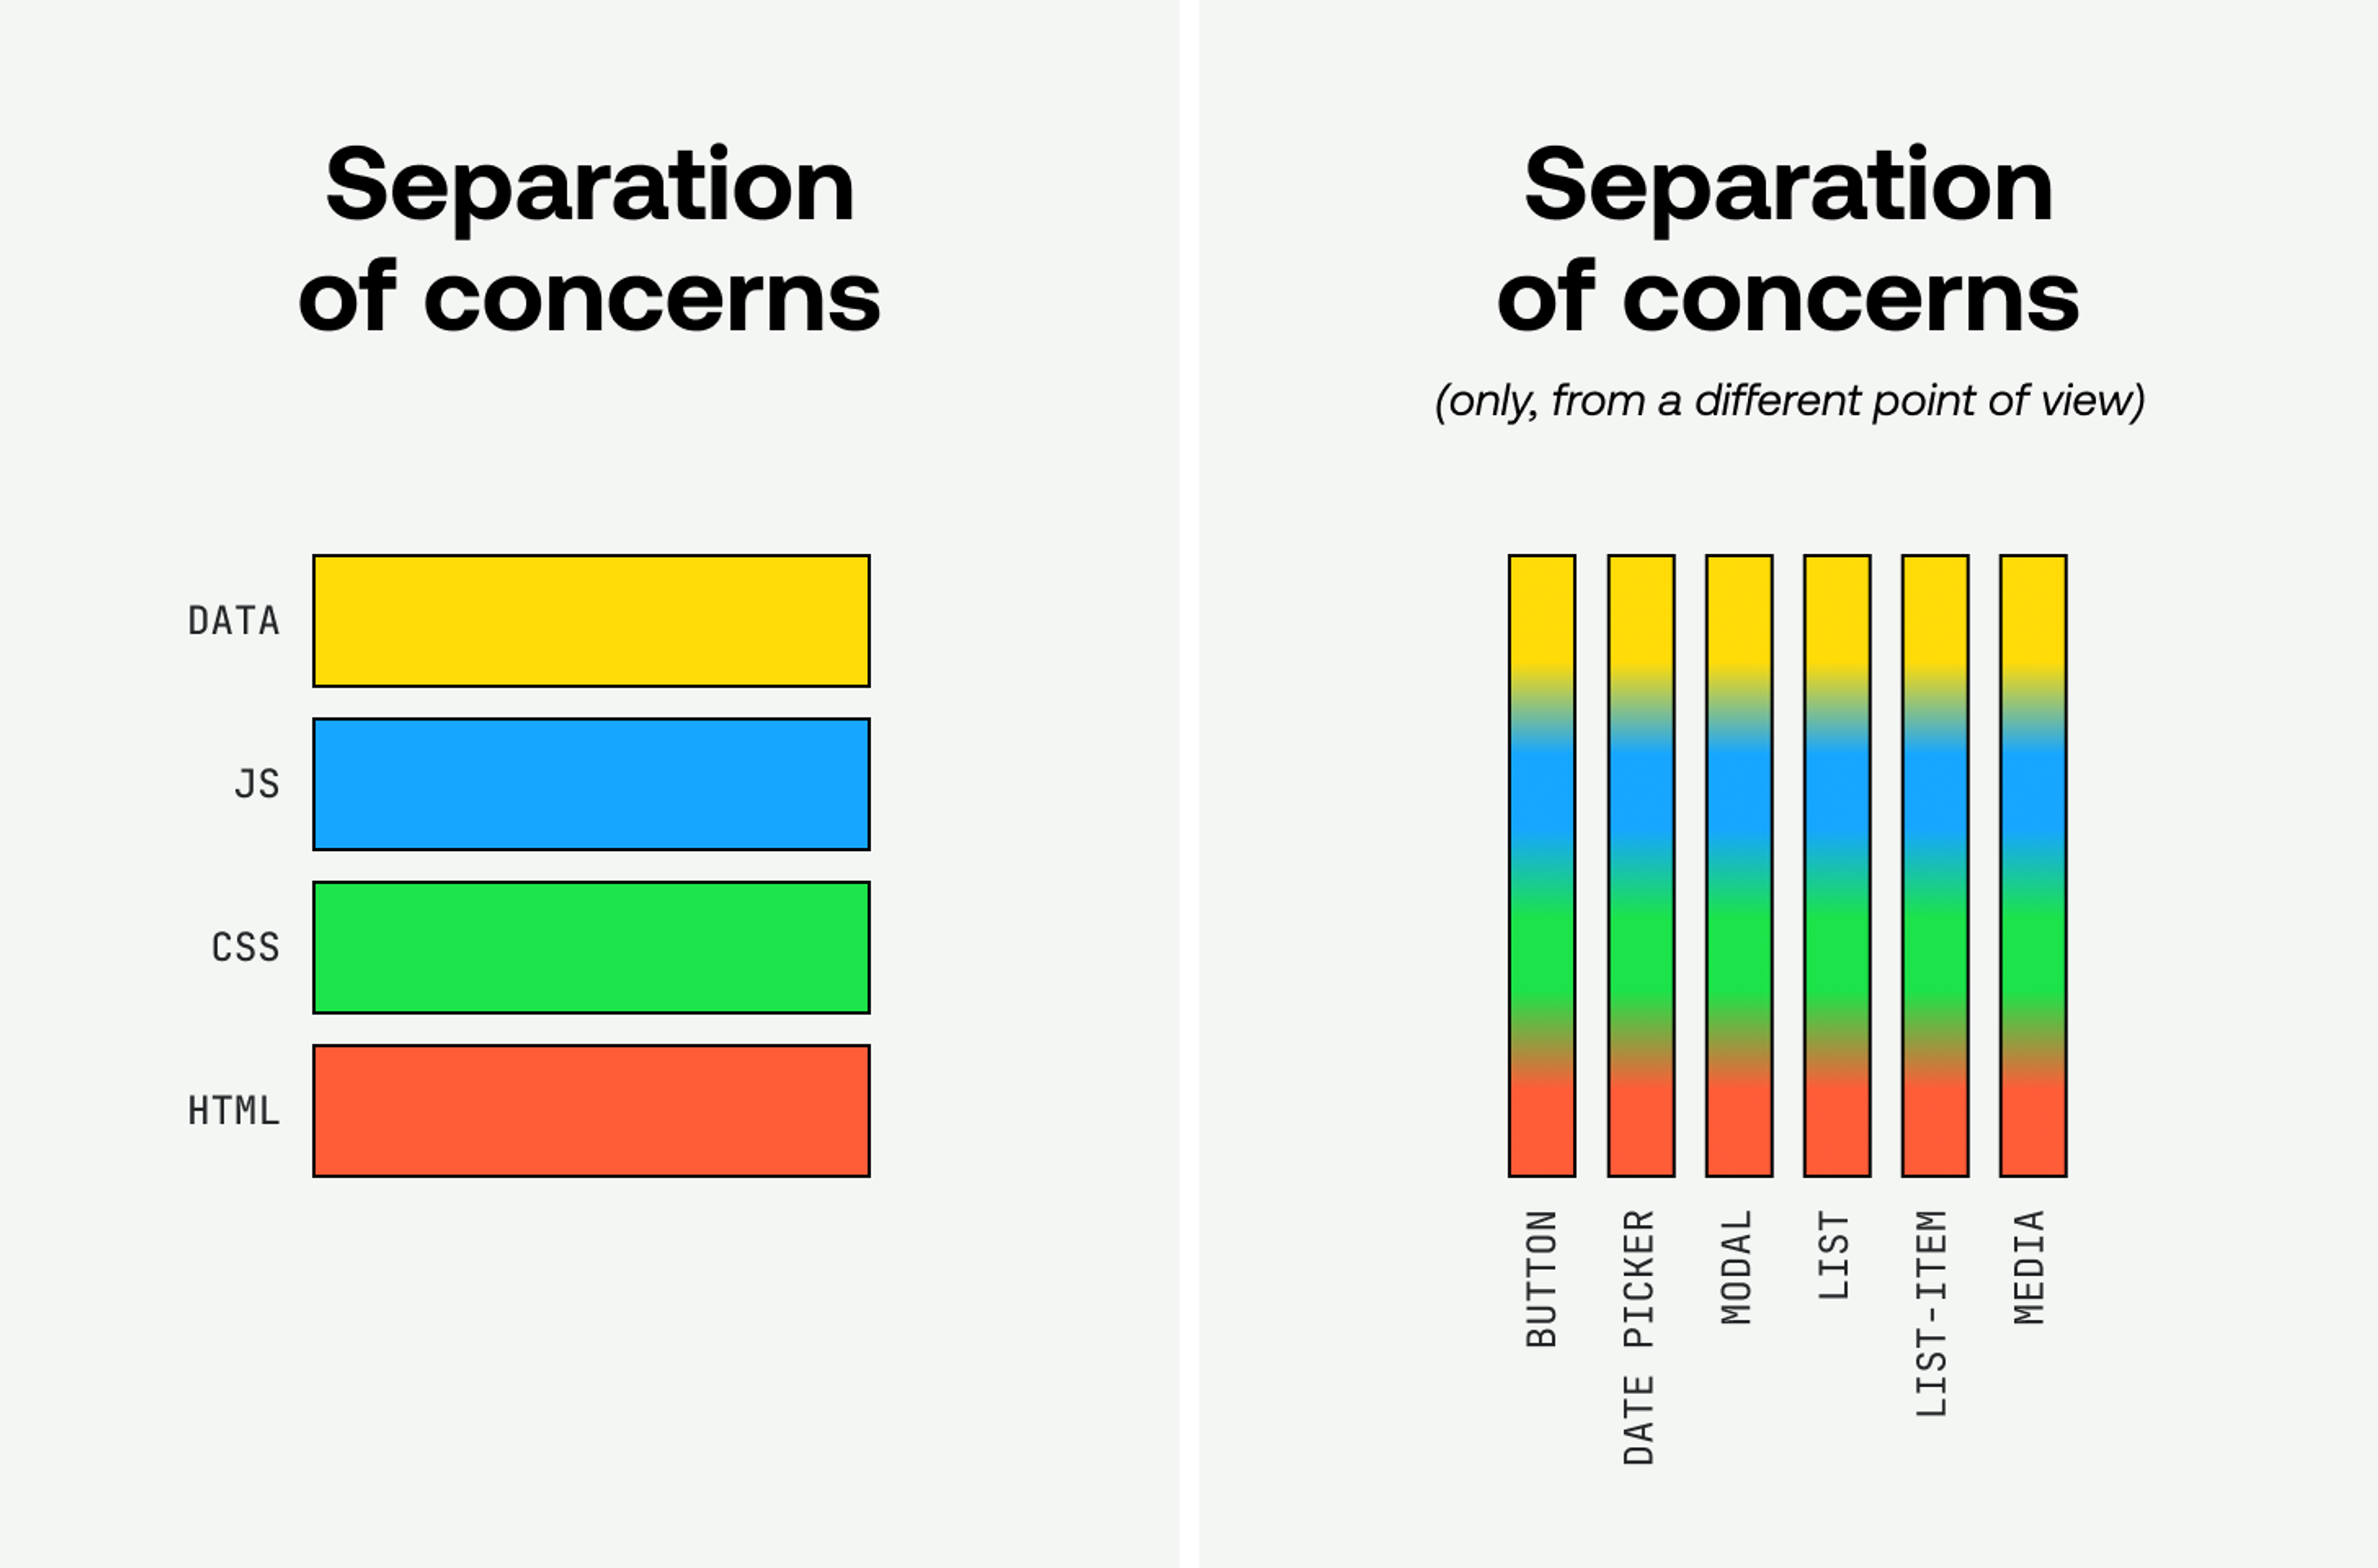 Two diagrams, side-by-side. The first is labeled "Separation of concerns". It shows four bars, stacked in four rows: Data, JS, CSS, and HTML. The next diagram is labeled "Separation of concerns, only, from a different point of view". It features more bars stacked in columns instead of rows. The bars are labeled by component: Button, Date Picker, Modal, and more. While the bars in the first diagram were four different solid colors, each of the bars in the second diagram is a gradient of all four colors, implying that each component spans the four concerns described in the first diagram.